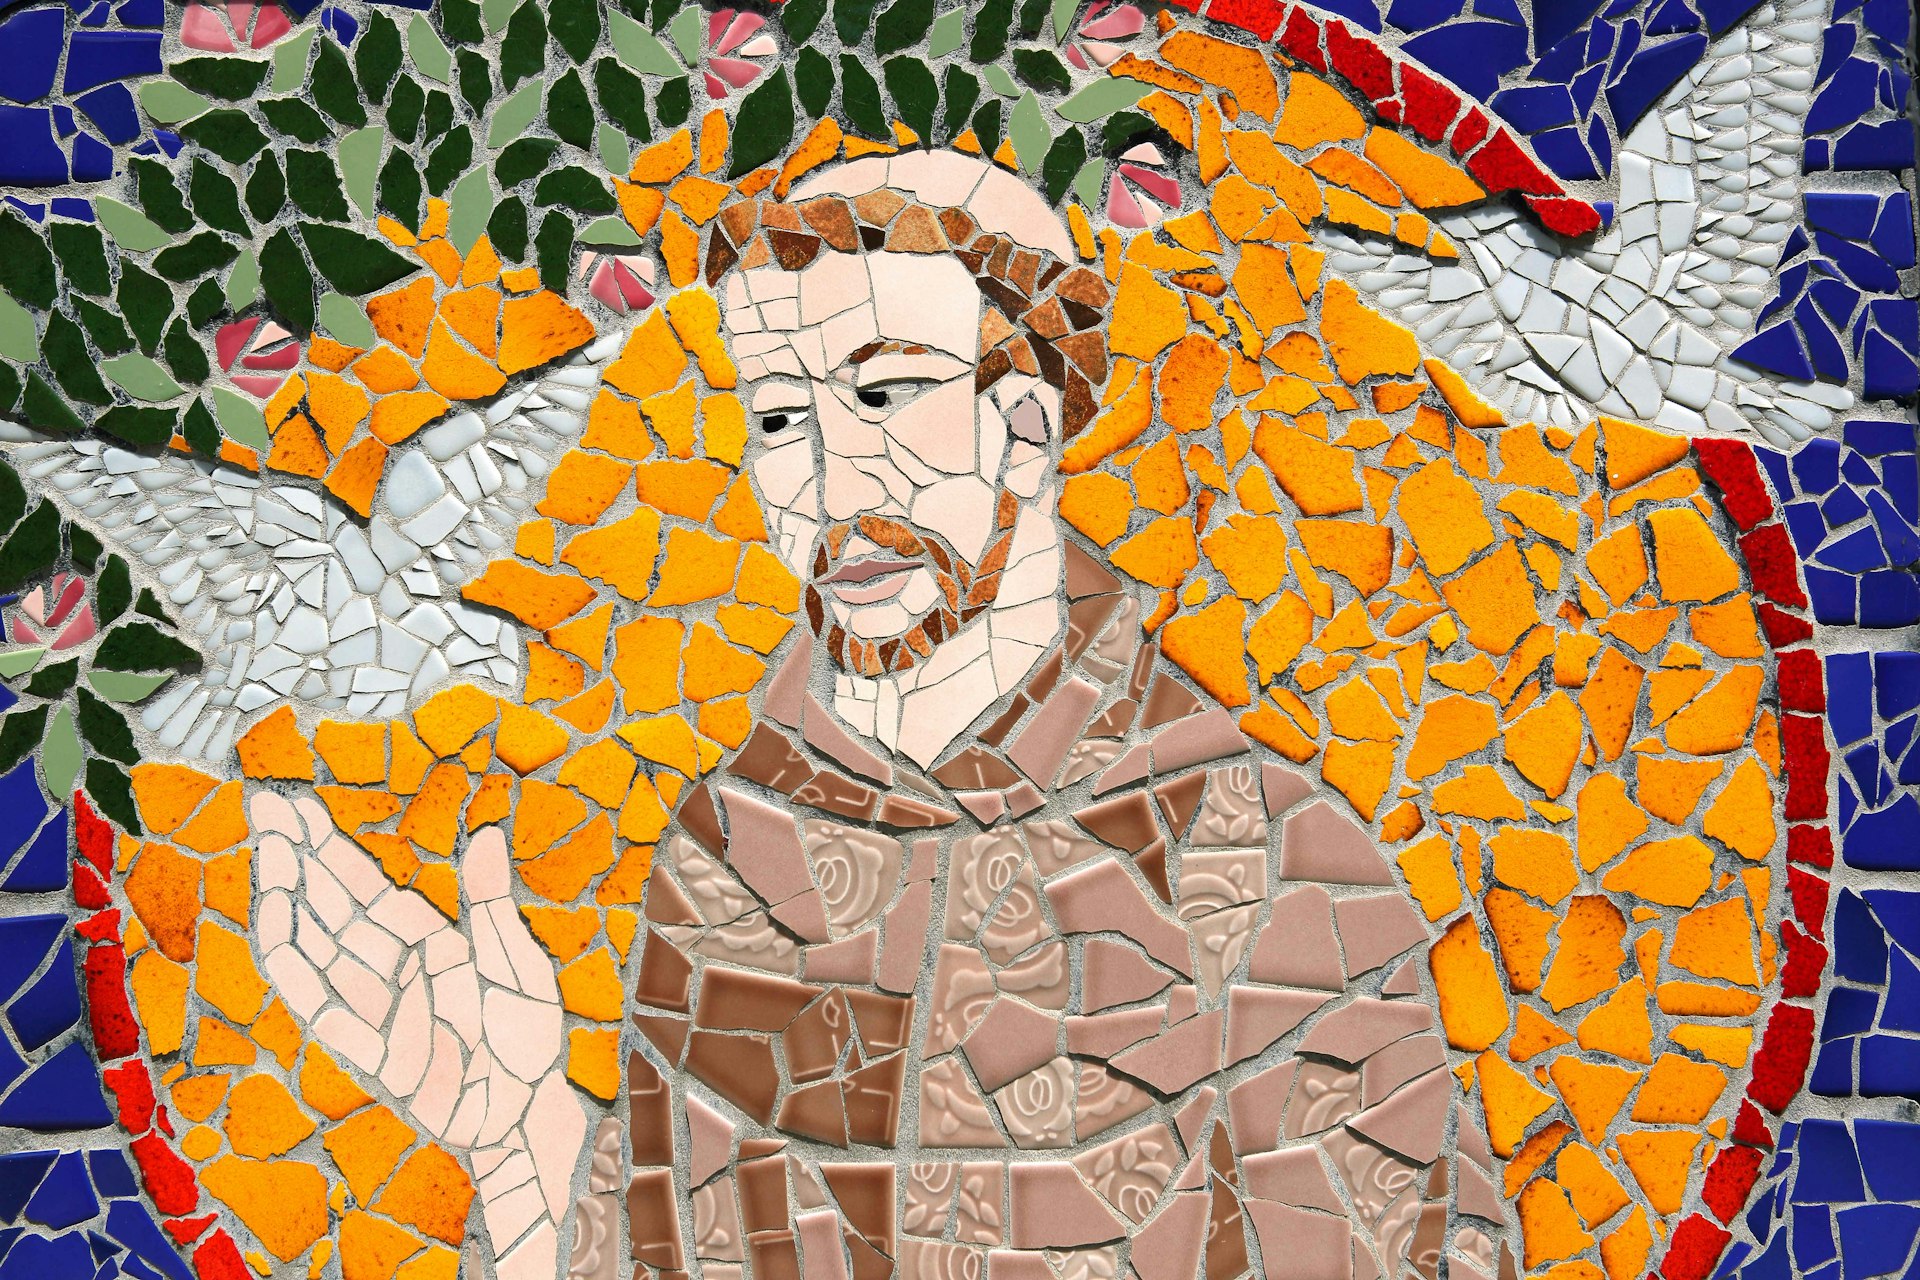 This mural, located near the entrance of the St. Francis Church on Moloka'i, depicts St. Francis of Assisi. Image by Steven Greaves / Getty